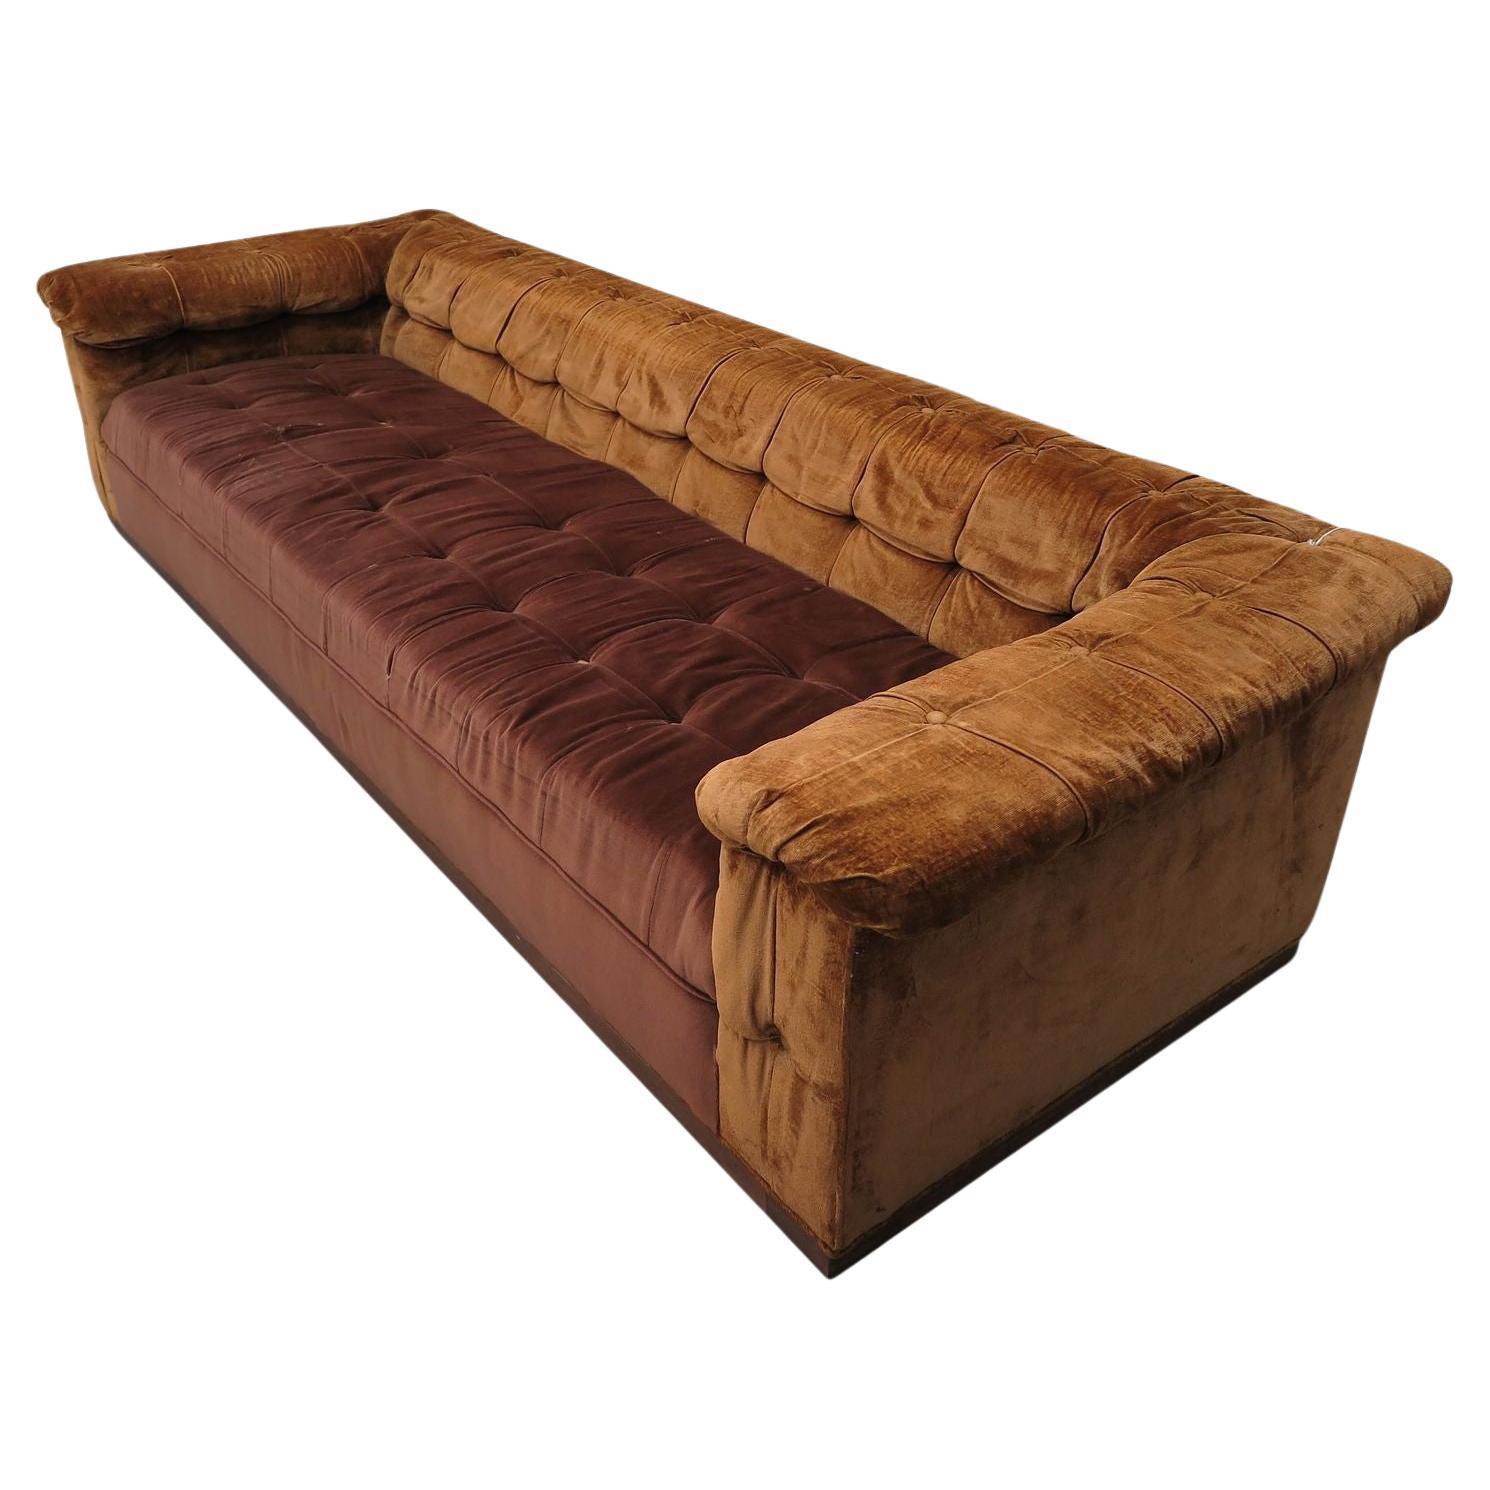 Edward Wormley for Dunbar, The Party Sofa, Model 5407, for Reupholstery.